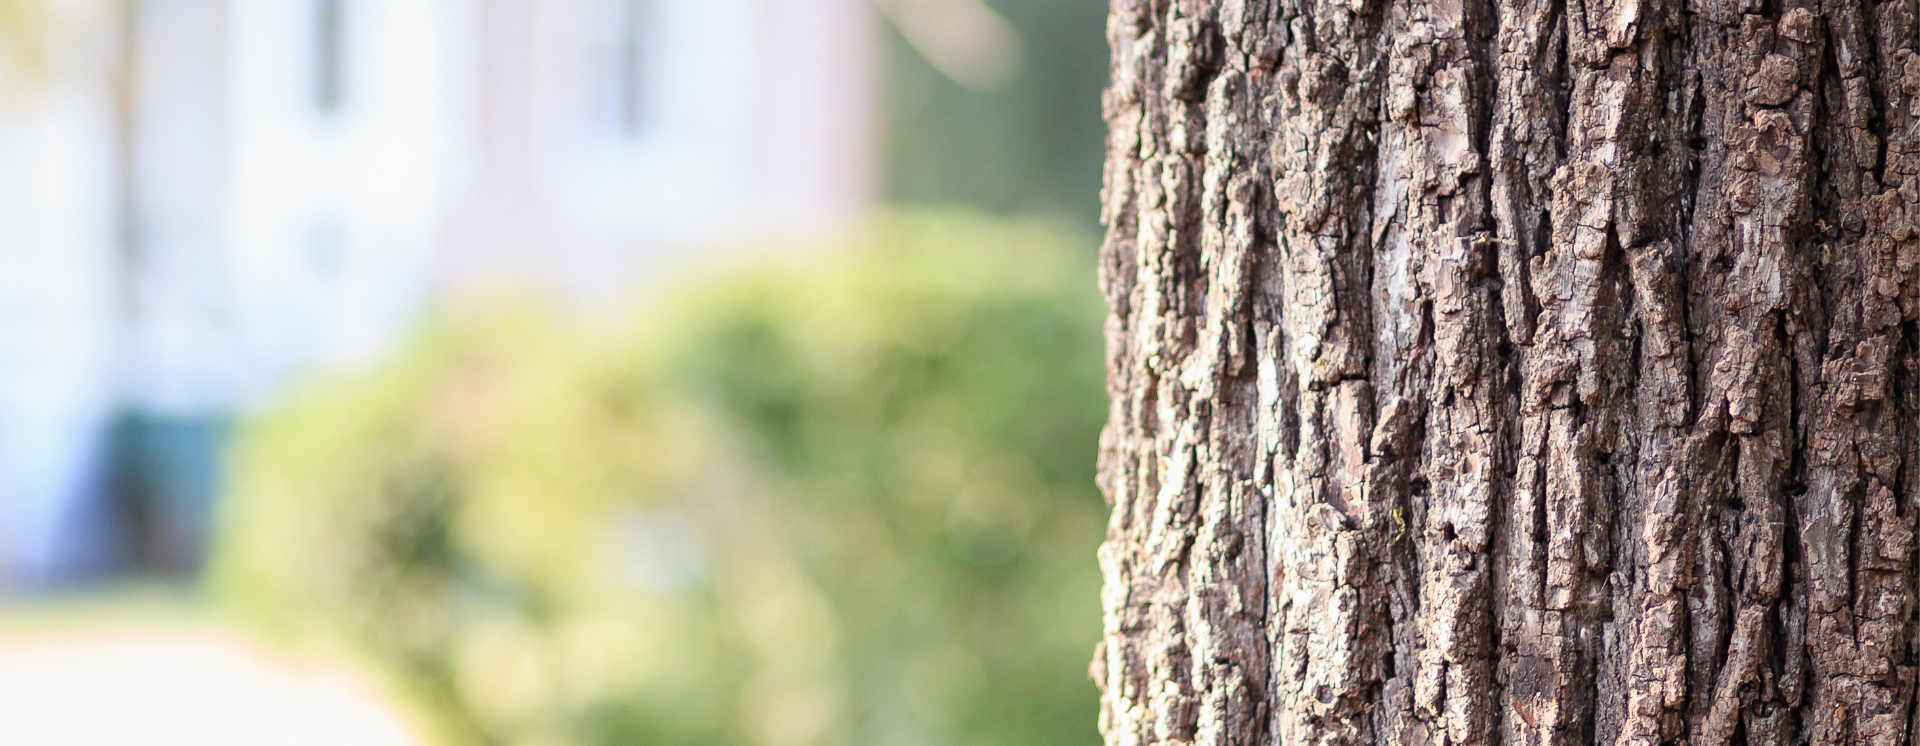 A tree trunk in close up on the right with blurred green background to the left.